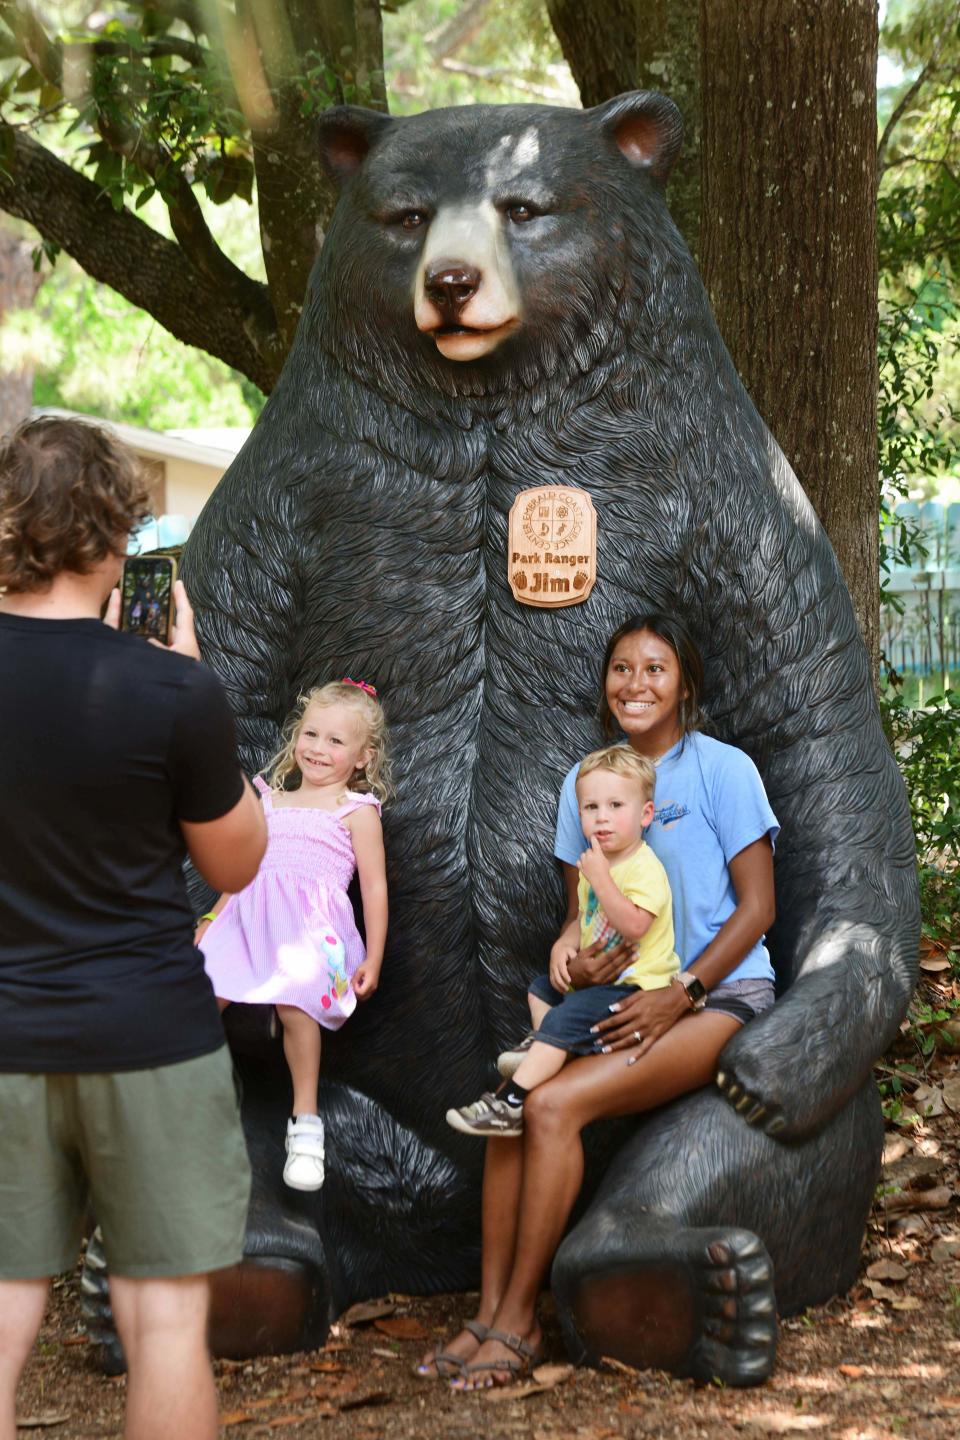 Ana Reynolds, right, poses with nephew Jonah Benner and niece Macie Benner atop a giant Florida black bear at the Emerald Coast Science Center. The bear is part of the science center's new Florida National Scenic Trail mural and exhibit.